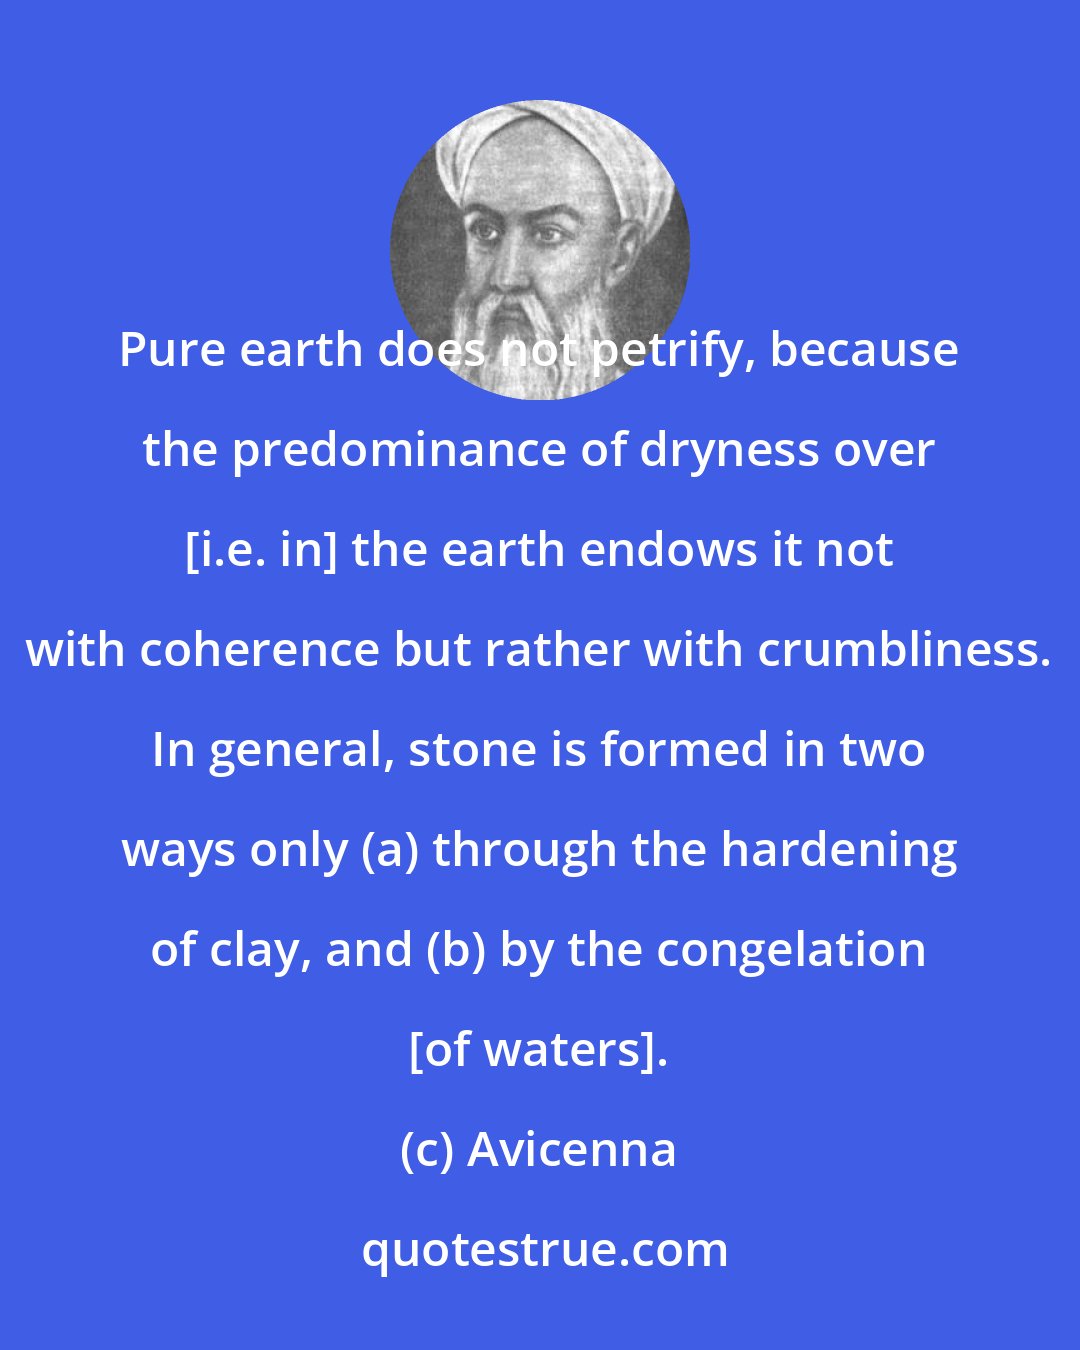 Avicenna: Pure earth does not petrify, because the predominance of dryness over [i.e. in] the earth endows it not with coherence but rather with crumbliness. In general, stone is formed in two ways only (a) through the hardening of clay, and (b) by the congelation [of waters].